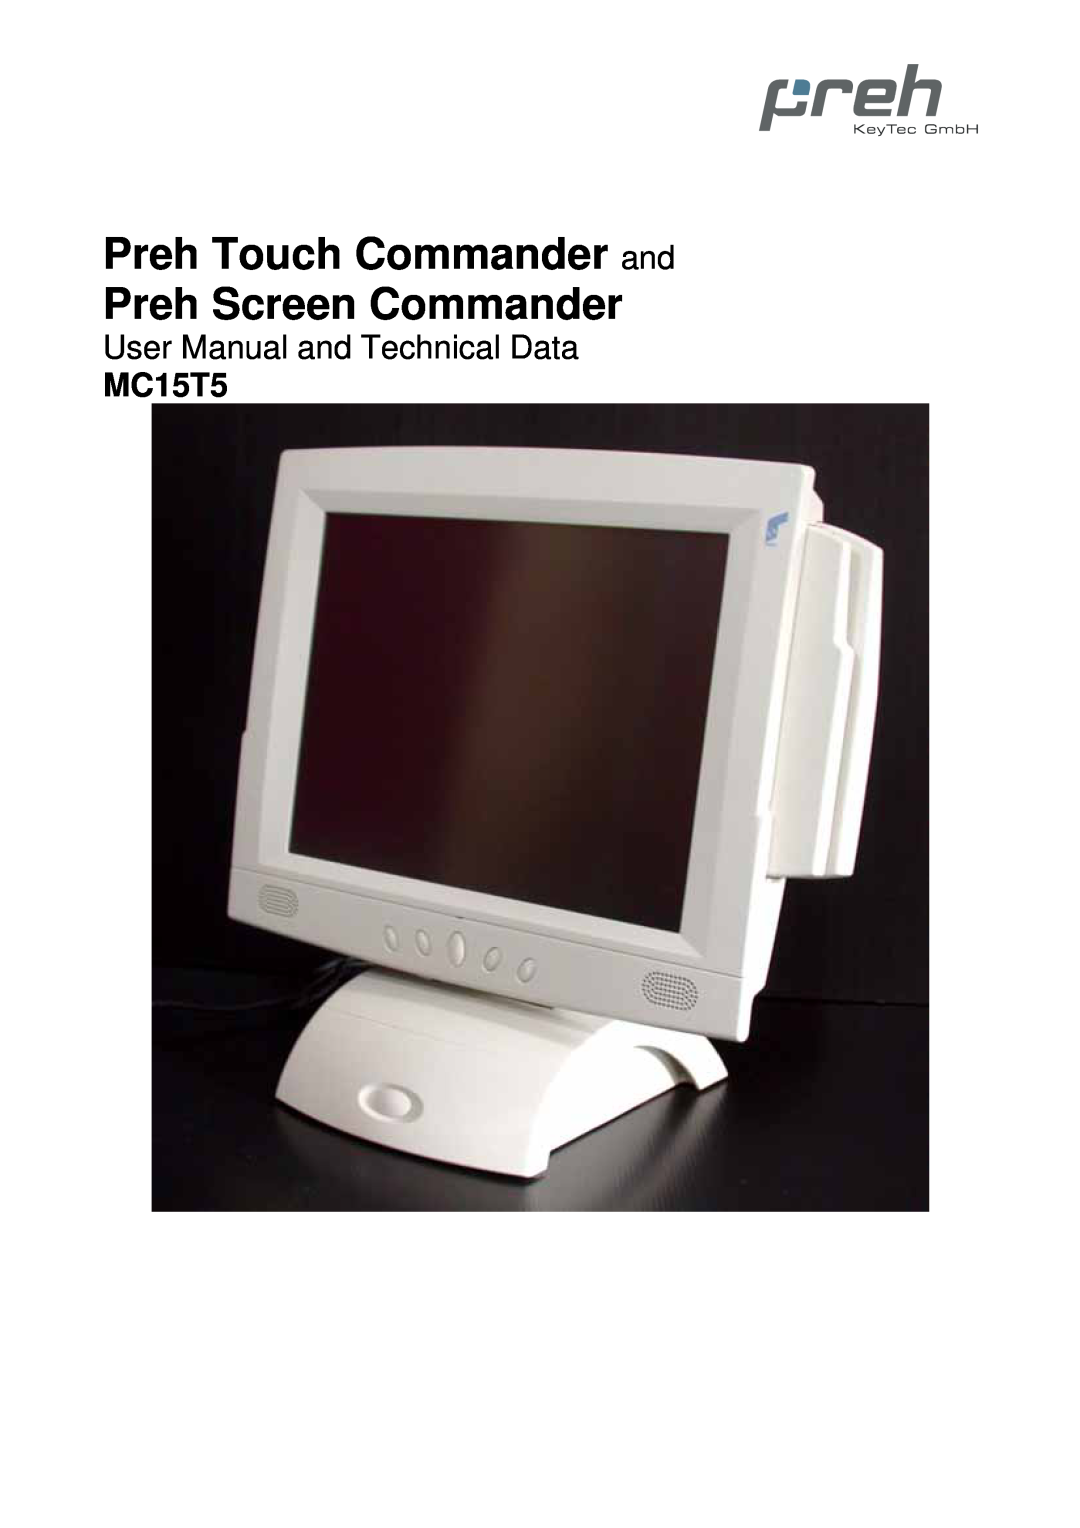 Preh MC15T5 manual Preh Touch Commander and Preh Screen Commander, User Manual and Technical Data 